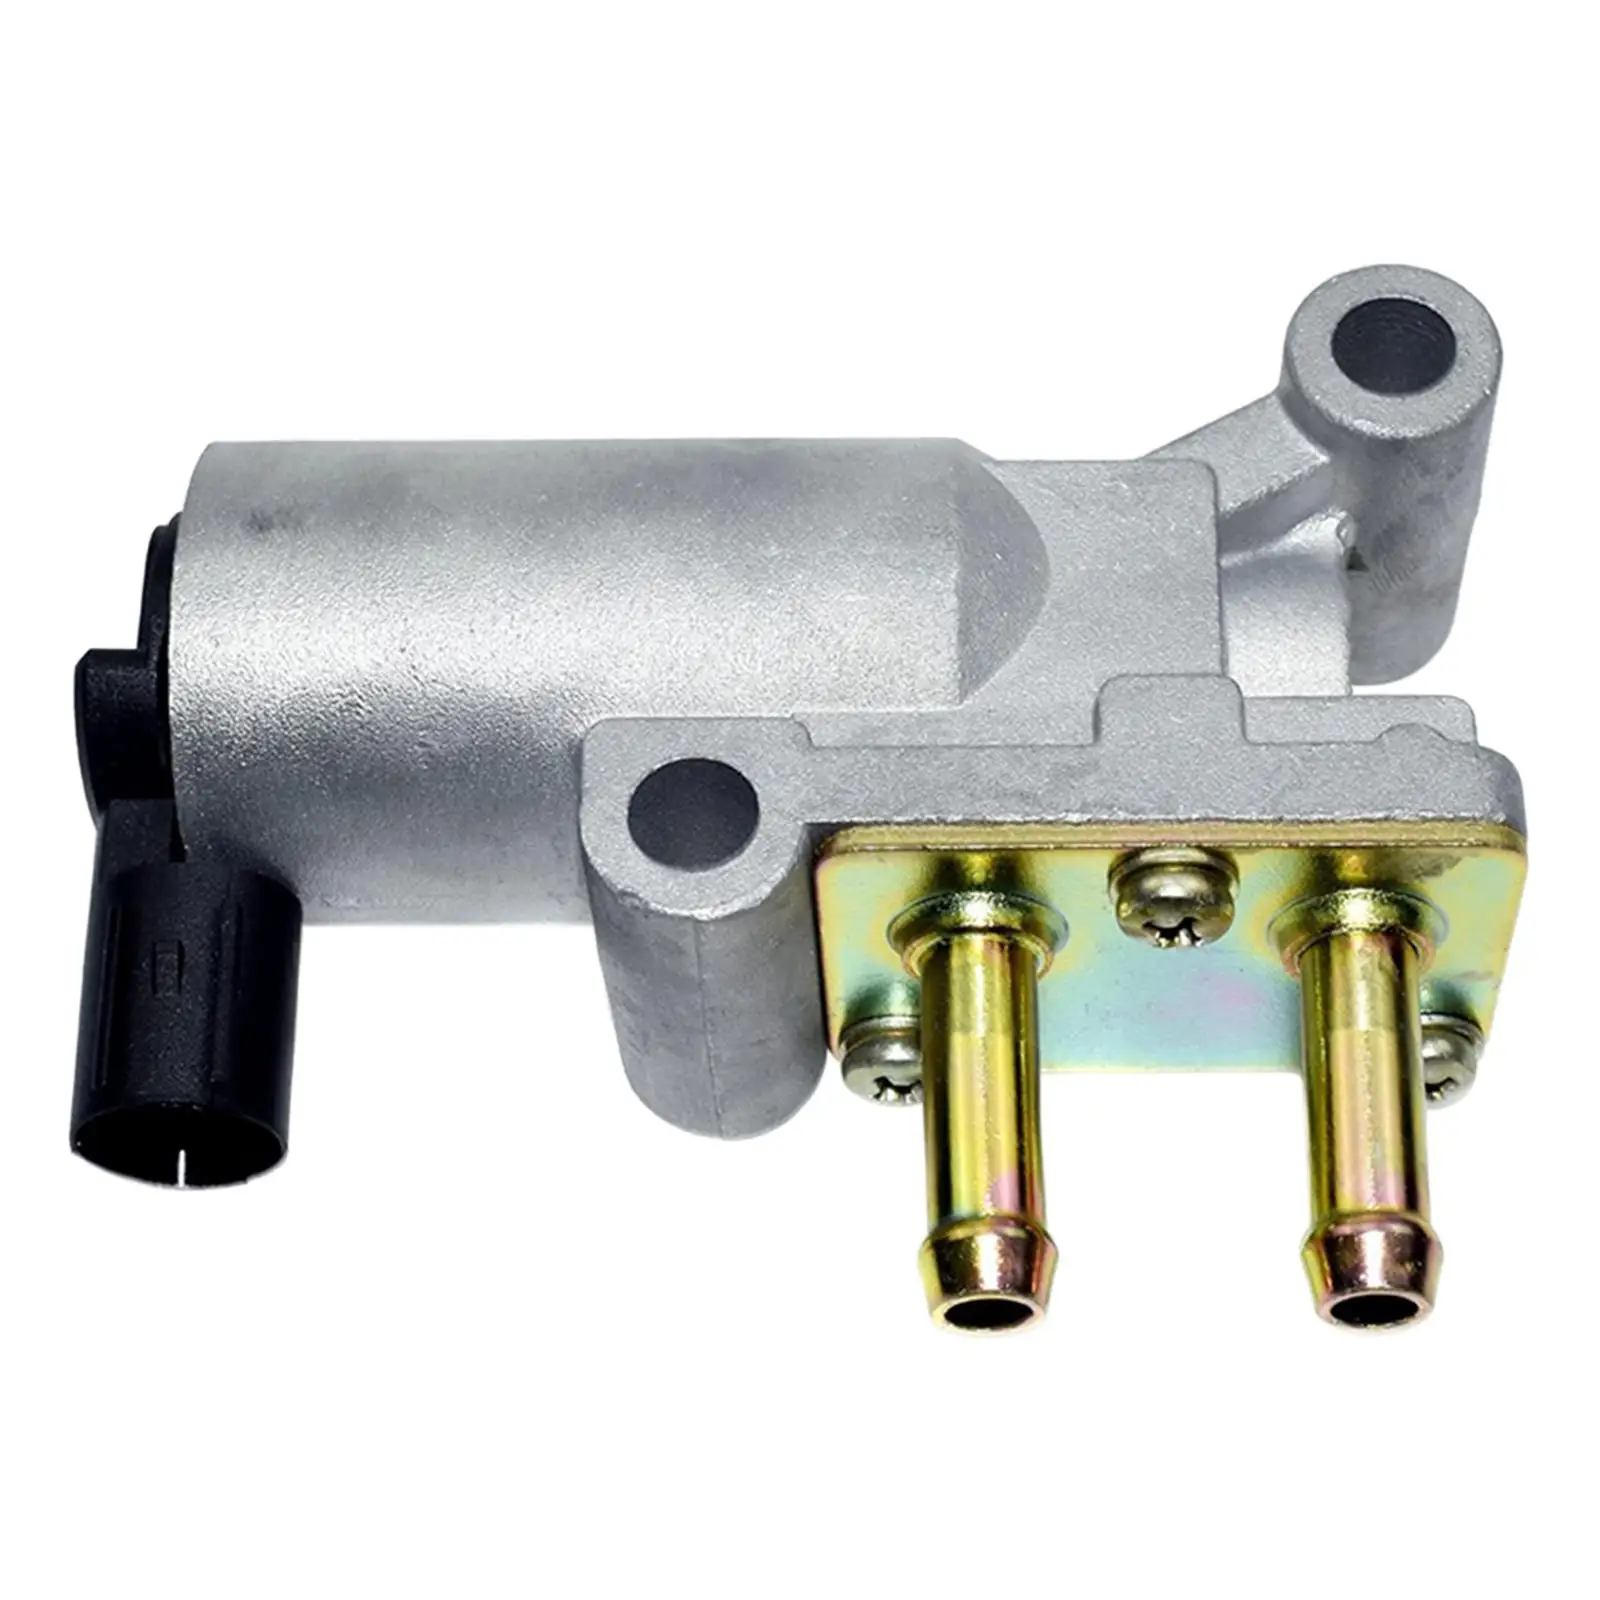 Auto Idle Air Control Valve 36450-P3F-004 Fuel Injection Replacement Part Fit for Honda Cr-V 2.0L 1992 1993 1994 1995